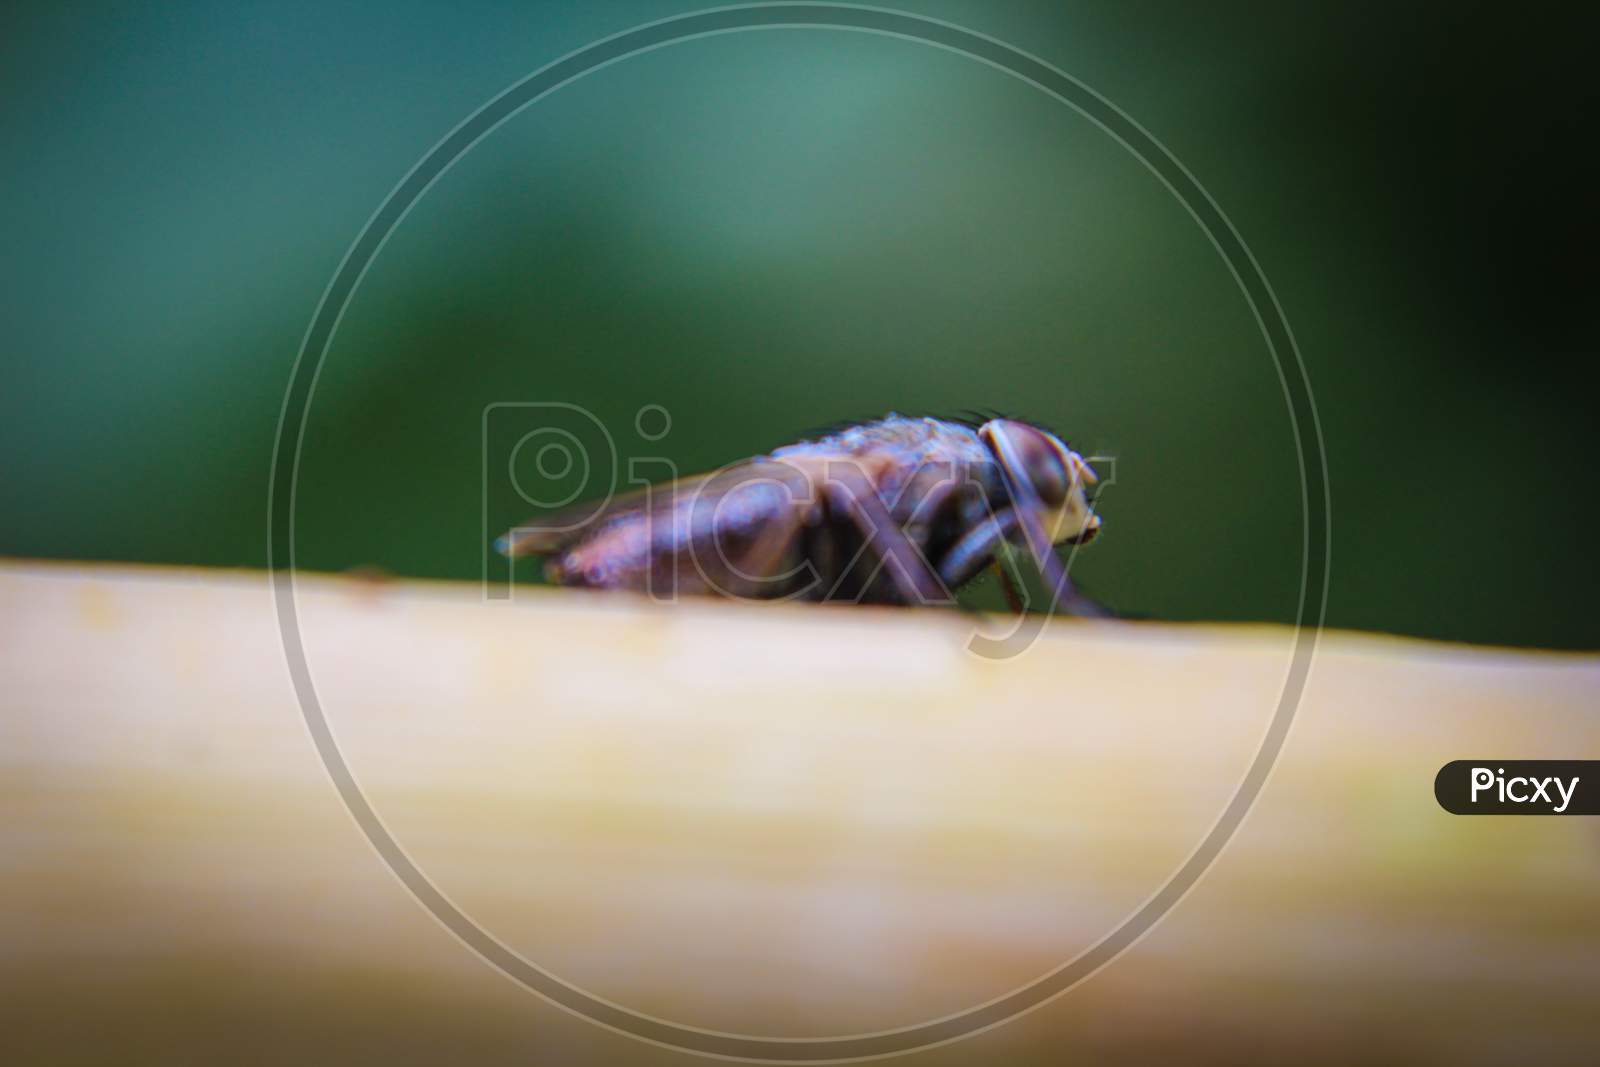 Macro Picture Of Fly On The Leaf